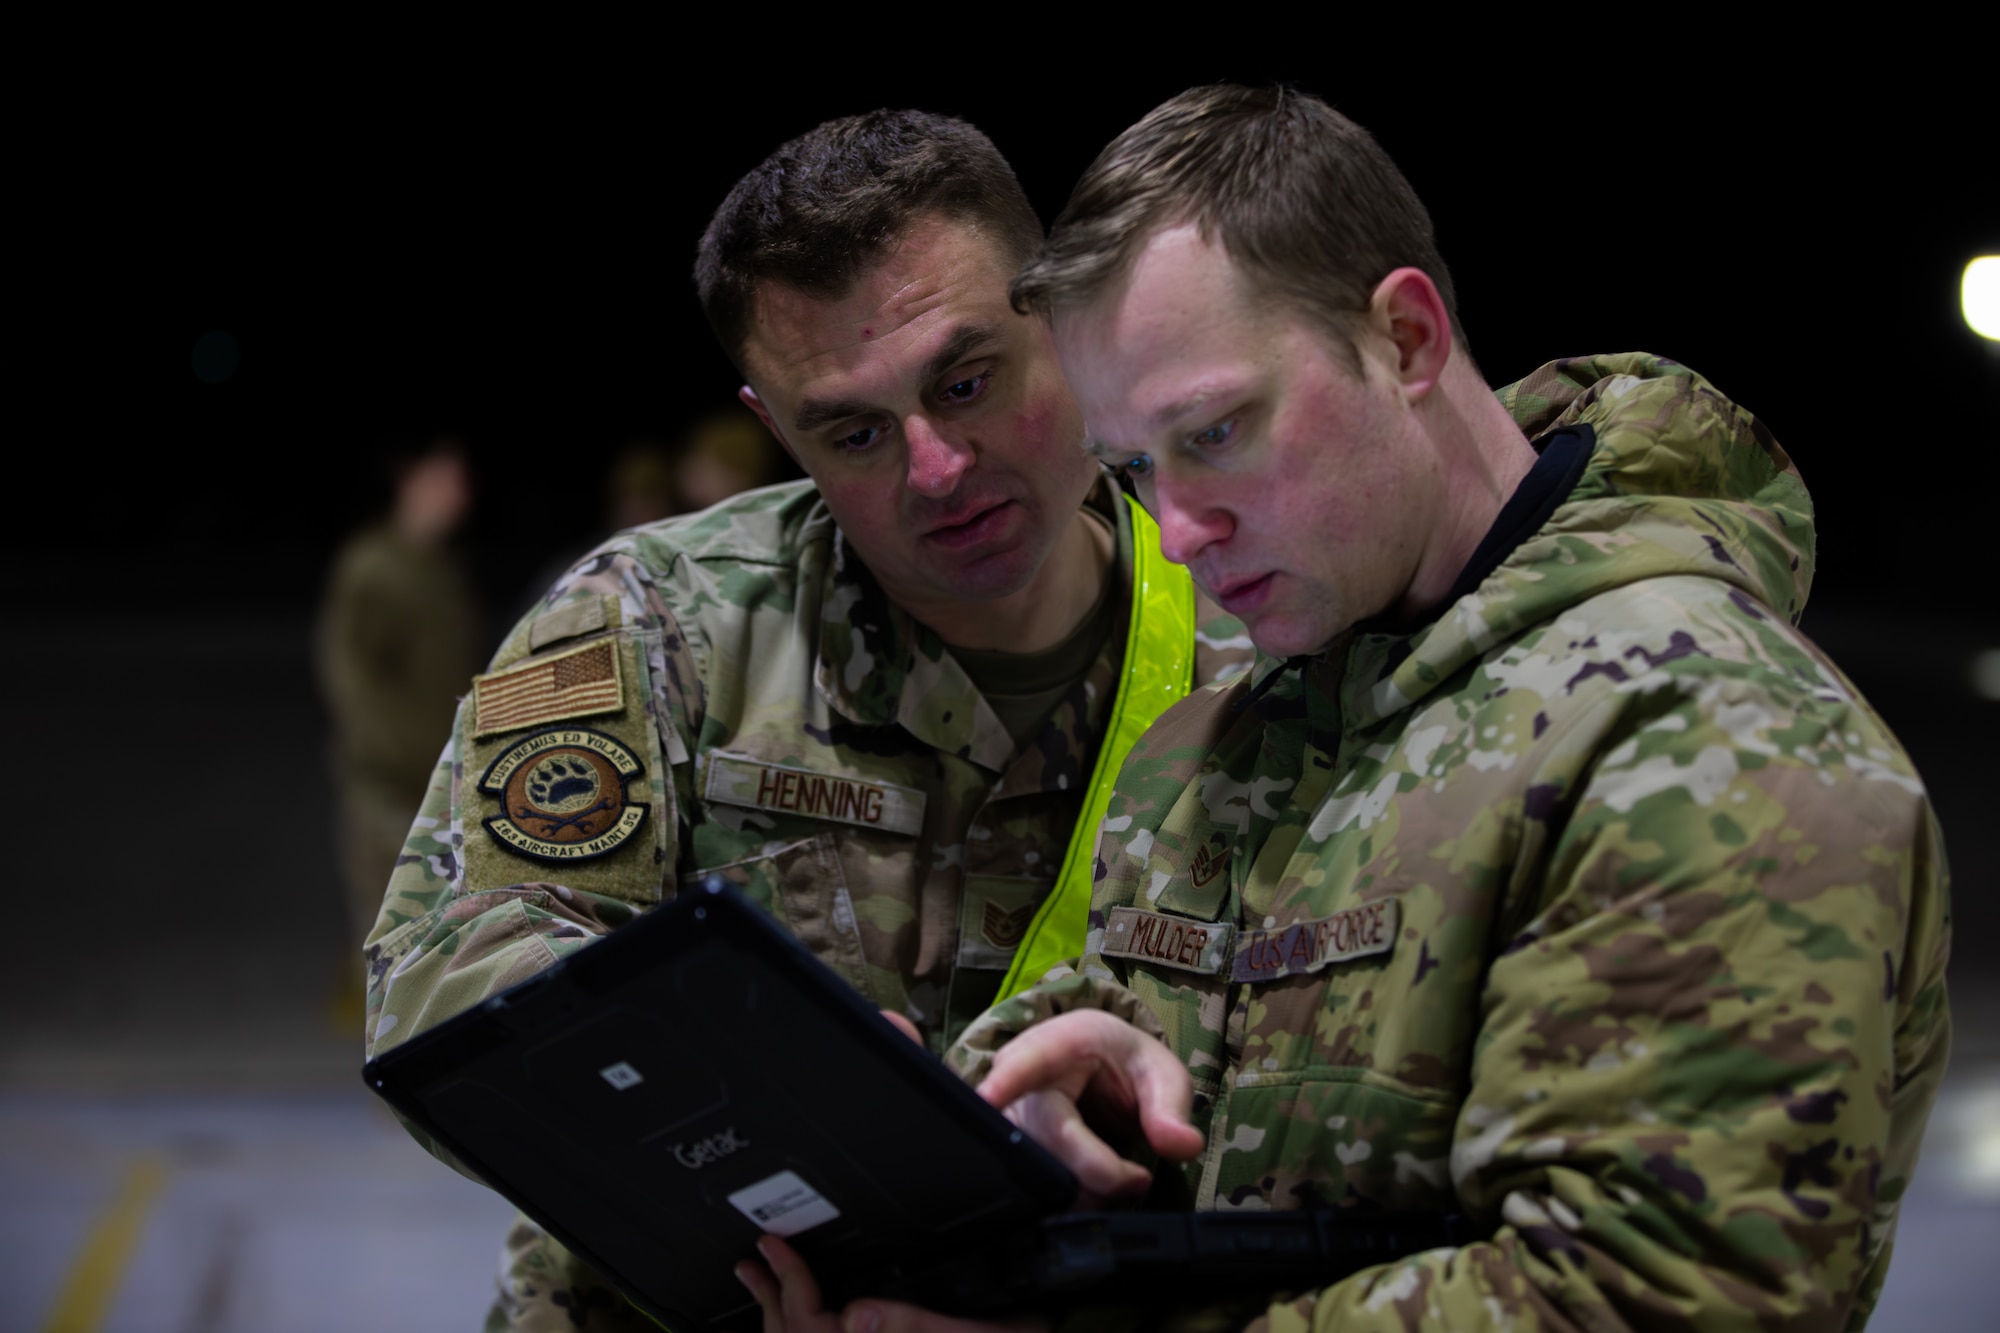 Staff Sgt. Mulder and Tech Sgt. Todd Henning, airmen assigned to the 163rd Aircraft Maintenance Squadron look at a field laptop during an MQ-9 Reaper inspection at the 178th Wing on Springfield-Beckley Air National Guard Base, Ohio, March 12, 2024. According to a Congressional Research Service report in 2023, an MQ-9 Reaper costs about $30 million. (U.S. Army National Guard photo by Staff Sgt. Thomas Moeger)